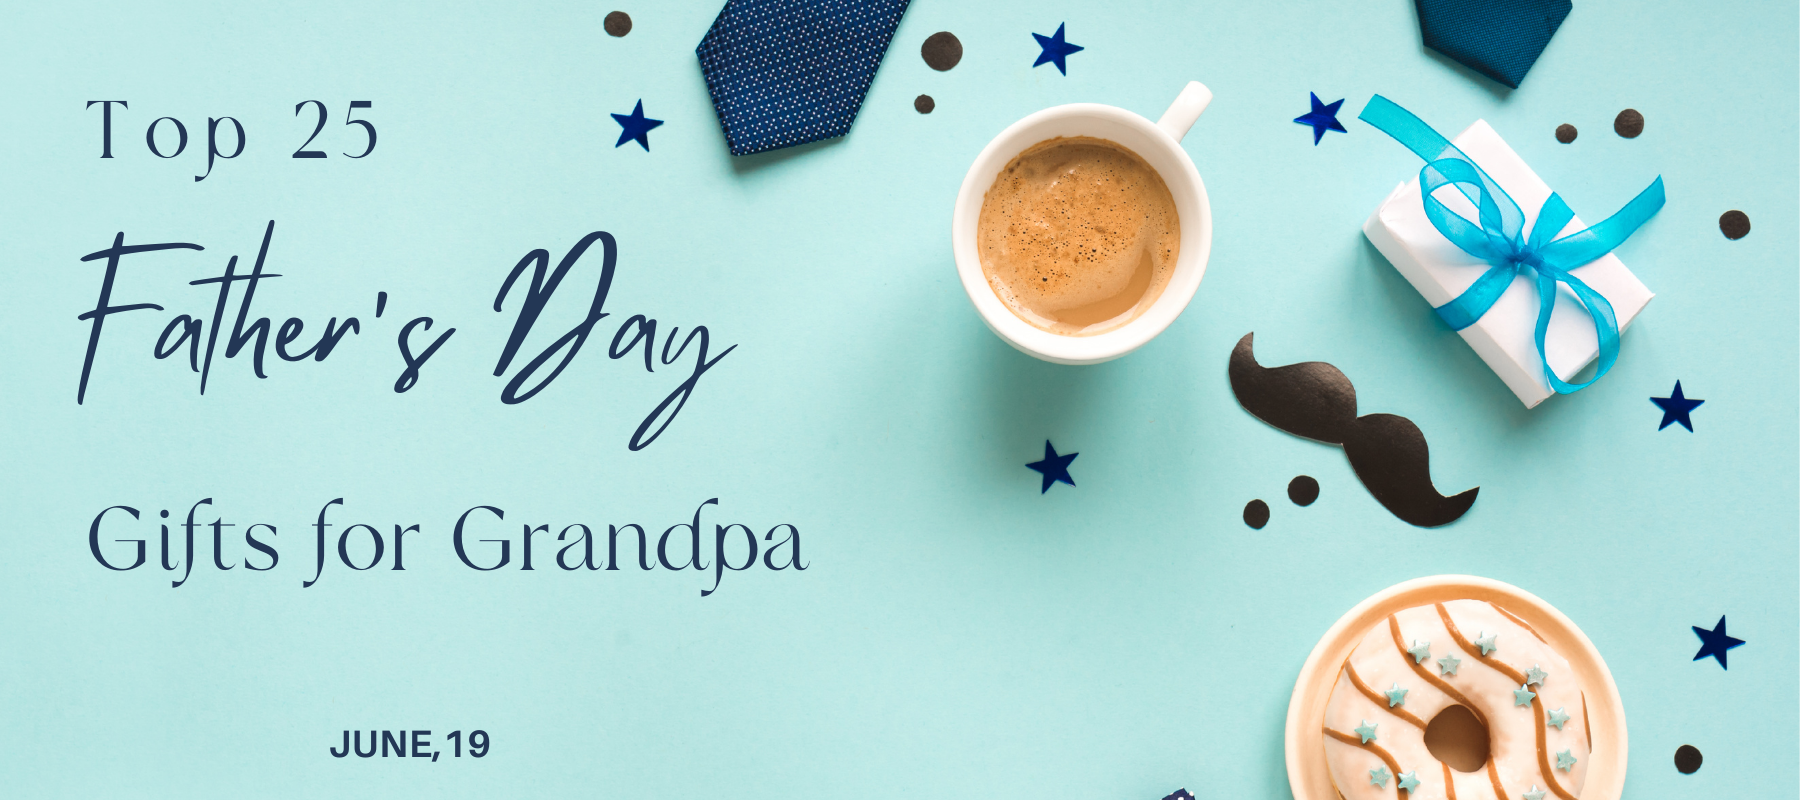 Top 25 Father's Day Gifts for Grandpa